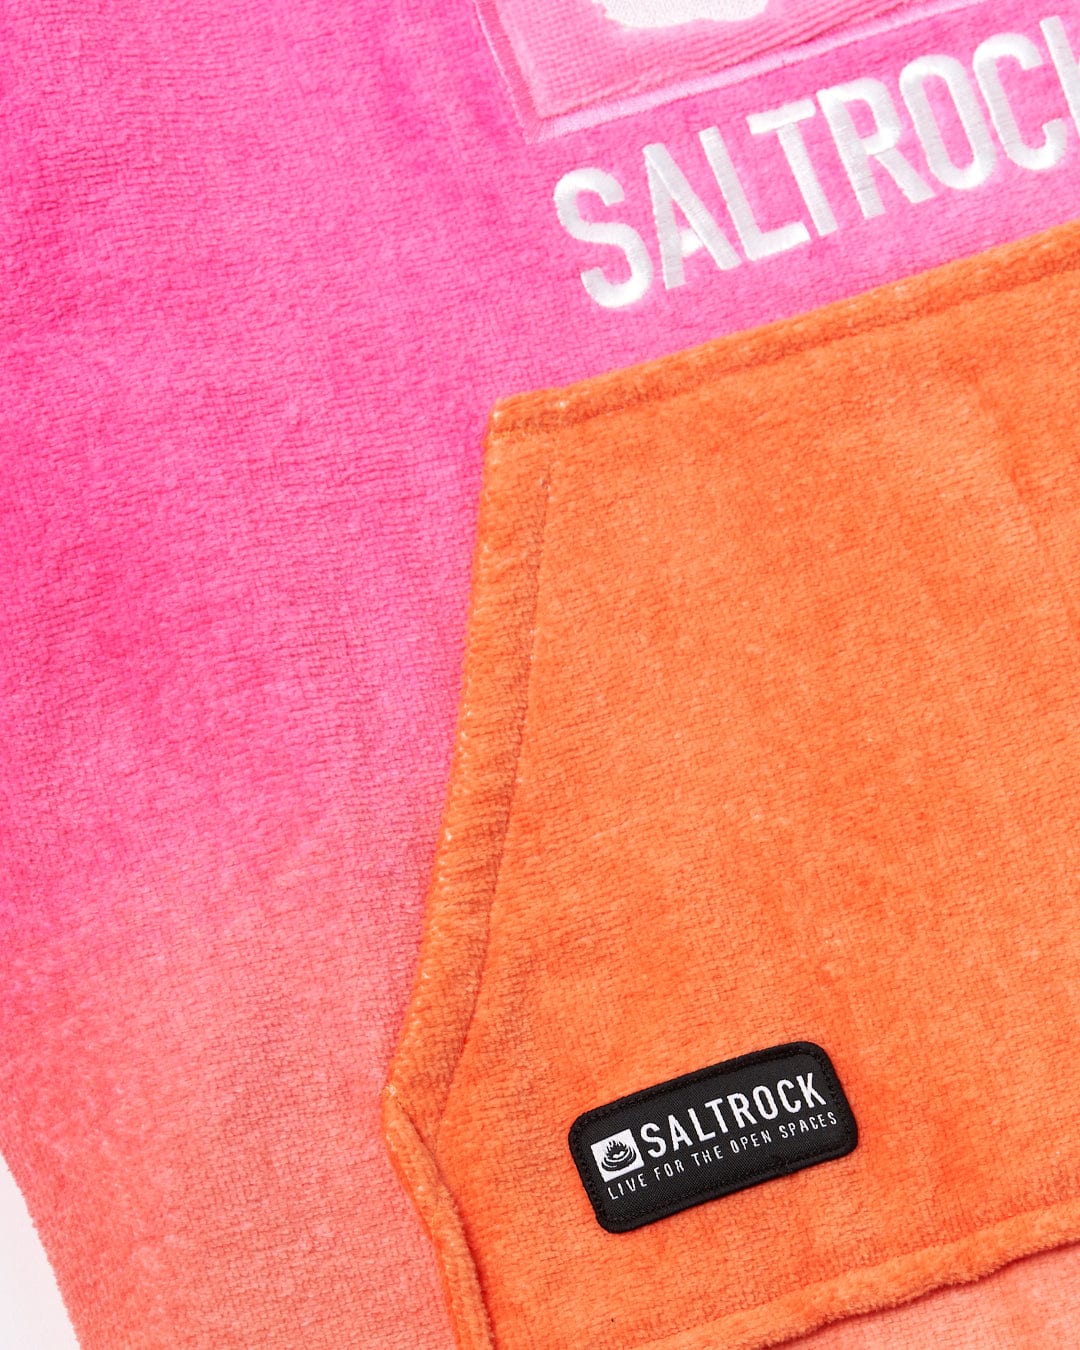 Close-up of a Tropic Dip - Kids Changing Towel - Pink/Orange partially overlaid with an orange pocket featuring a black Saltrock logo patch.